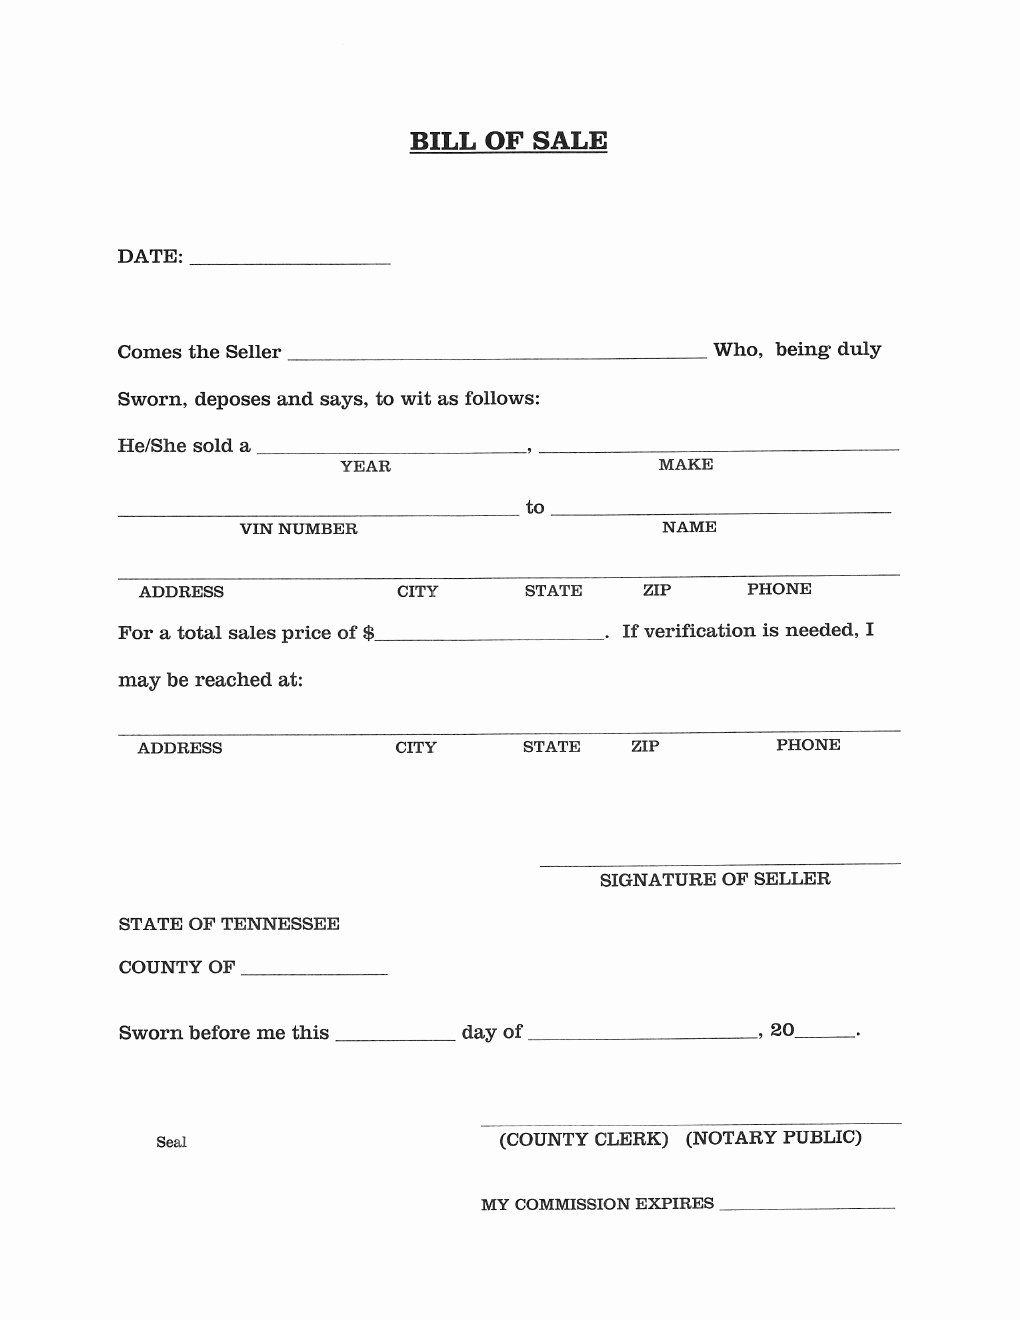 Alabama Bill Of Sale for Boat New Free Tennessee Vehicle Bill Of Sale form Download Pdf